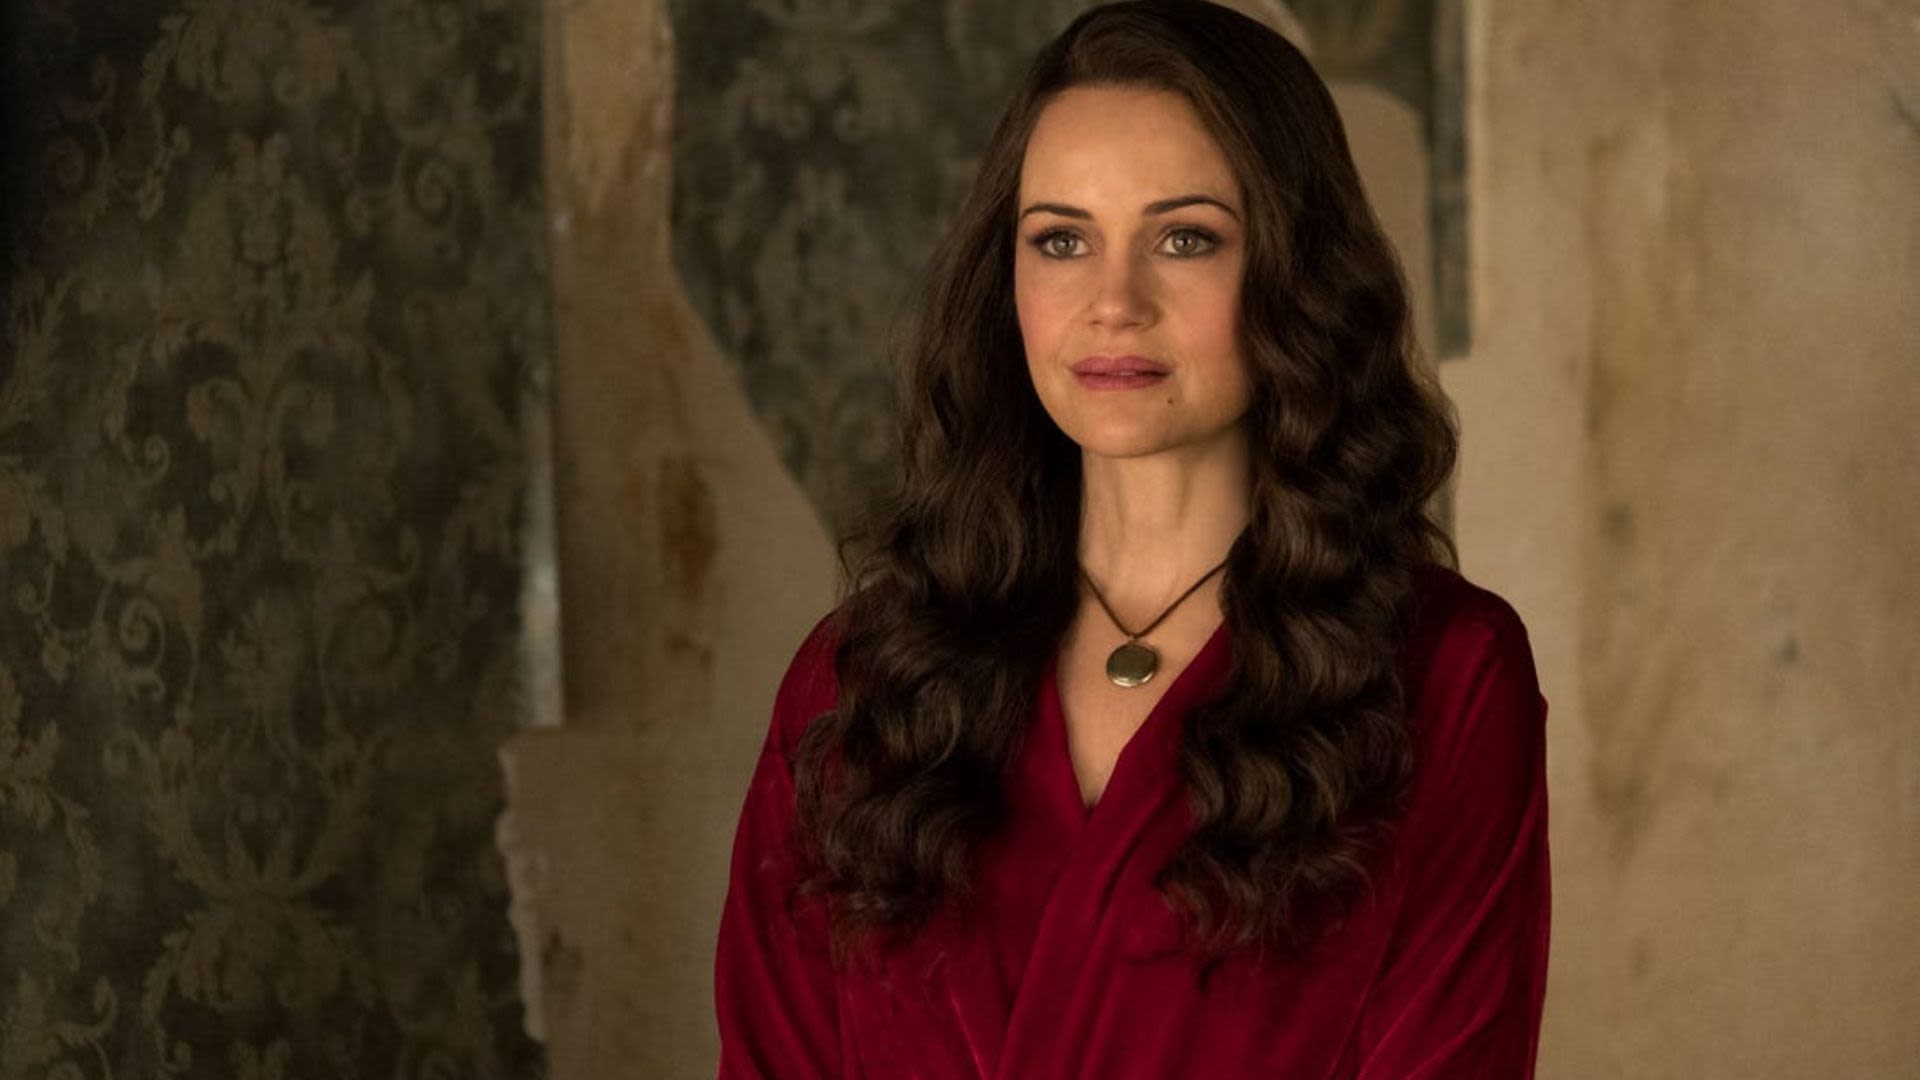 Haunting of Hill House creator Mike Flanagan says Netflix "refused at every turn" to release his movies and shows on DVD